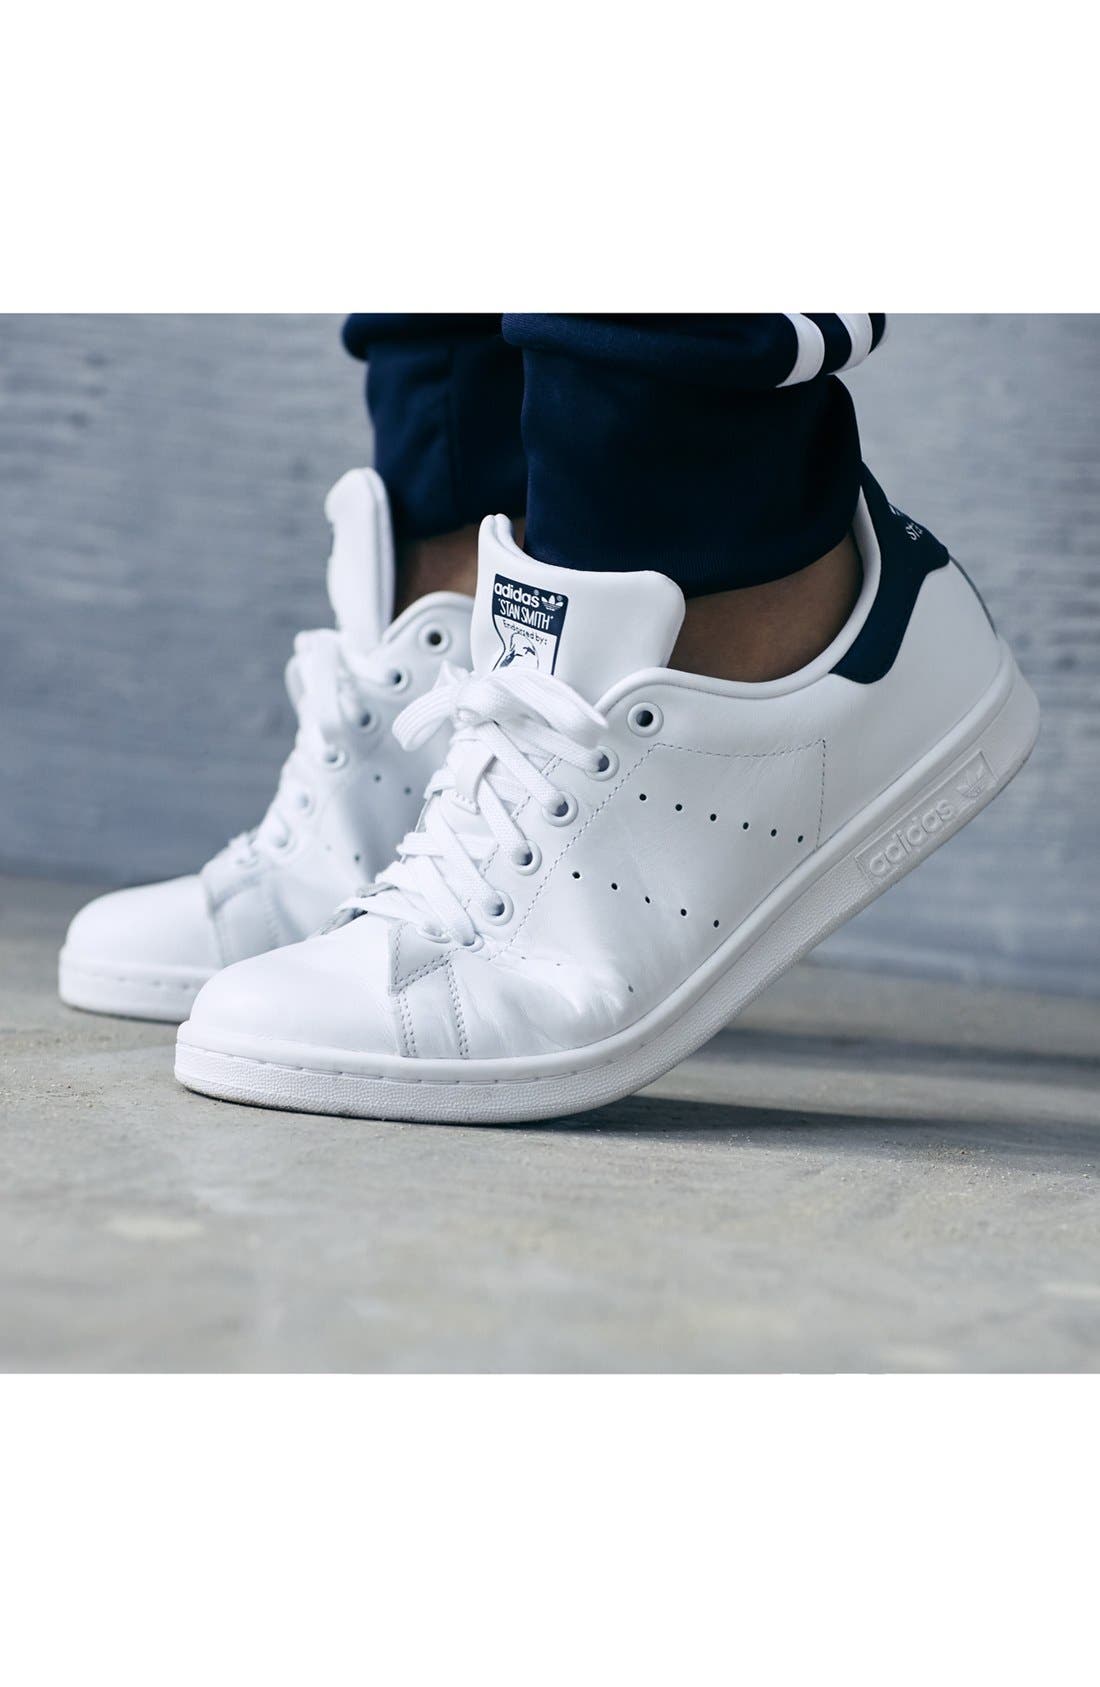 mens stan smith shoes